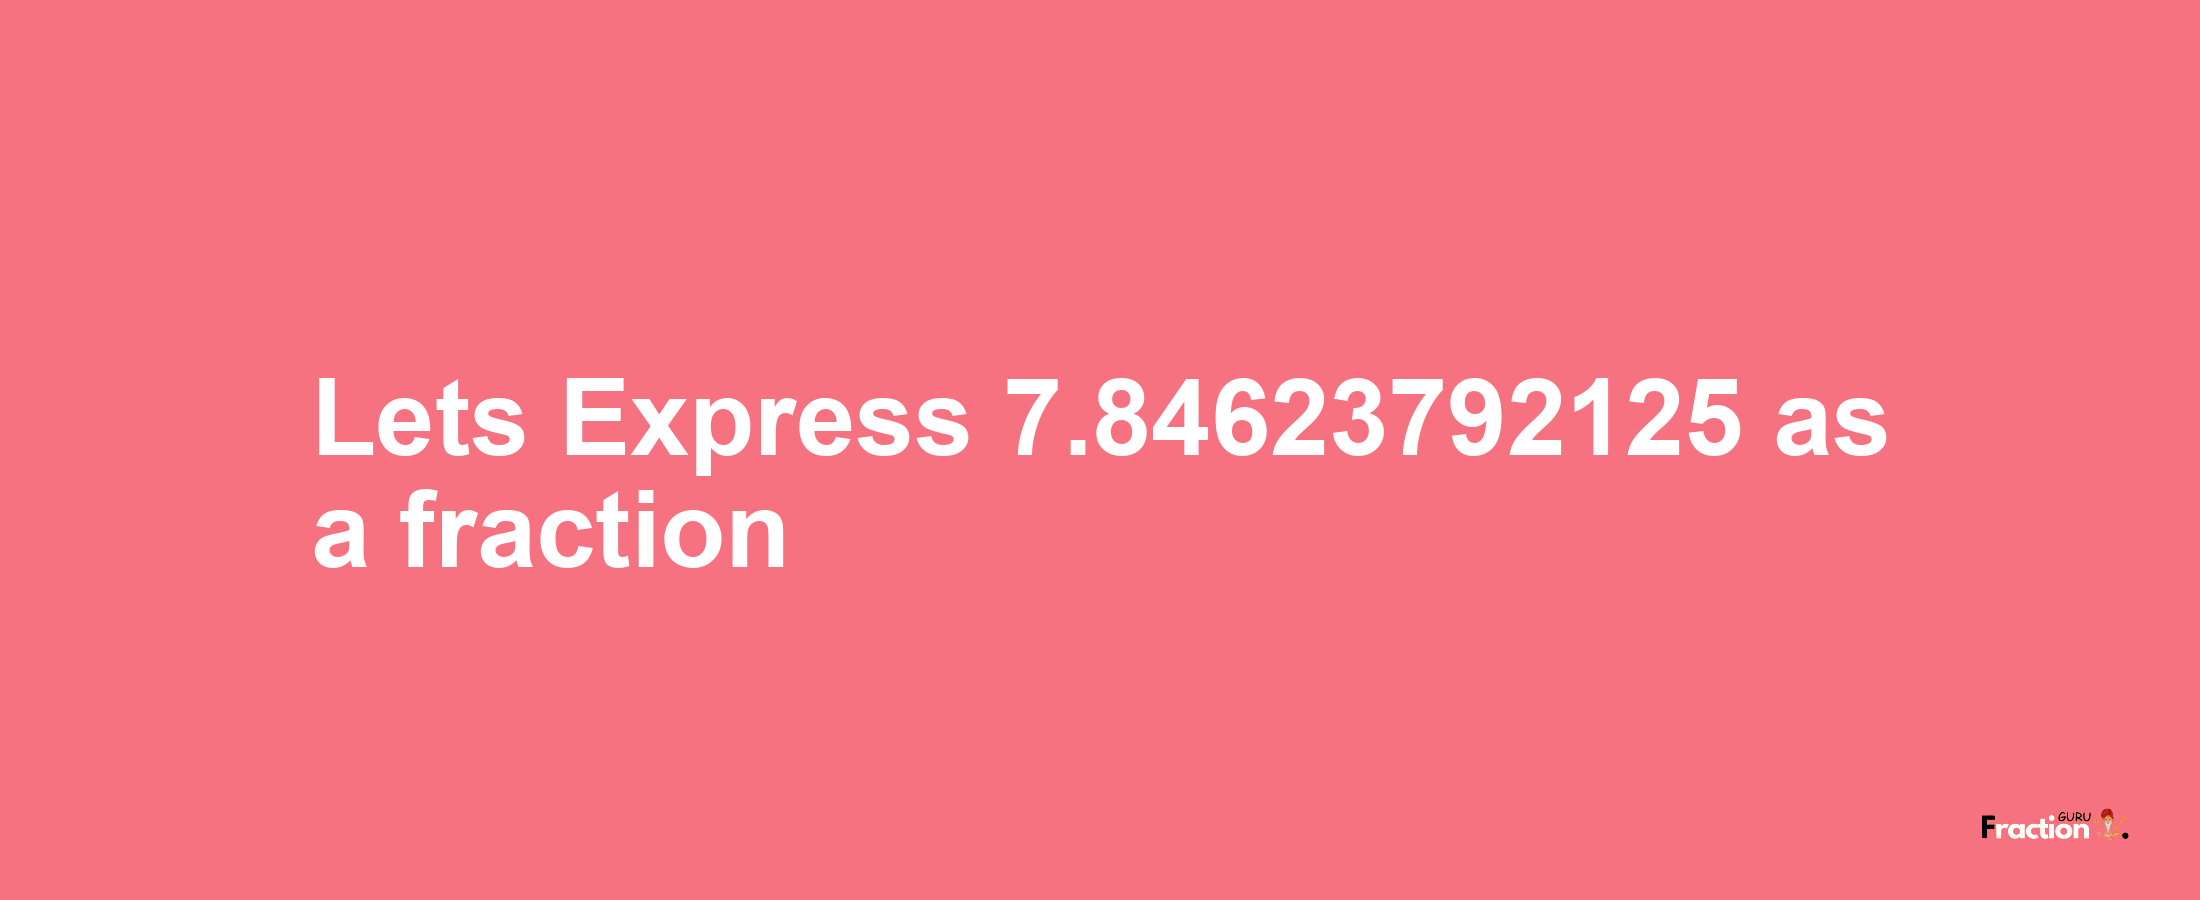 Lets Express 7.84623792125 as afraction